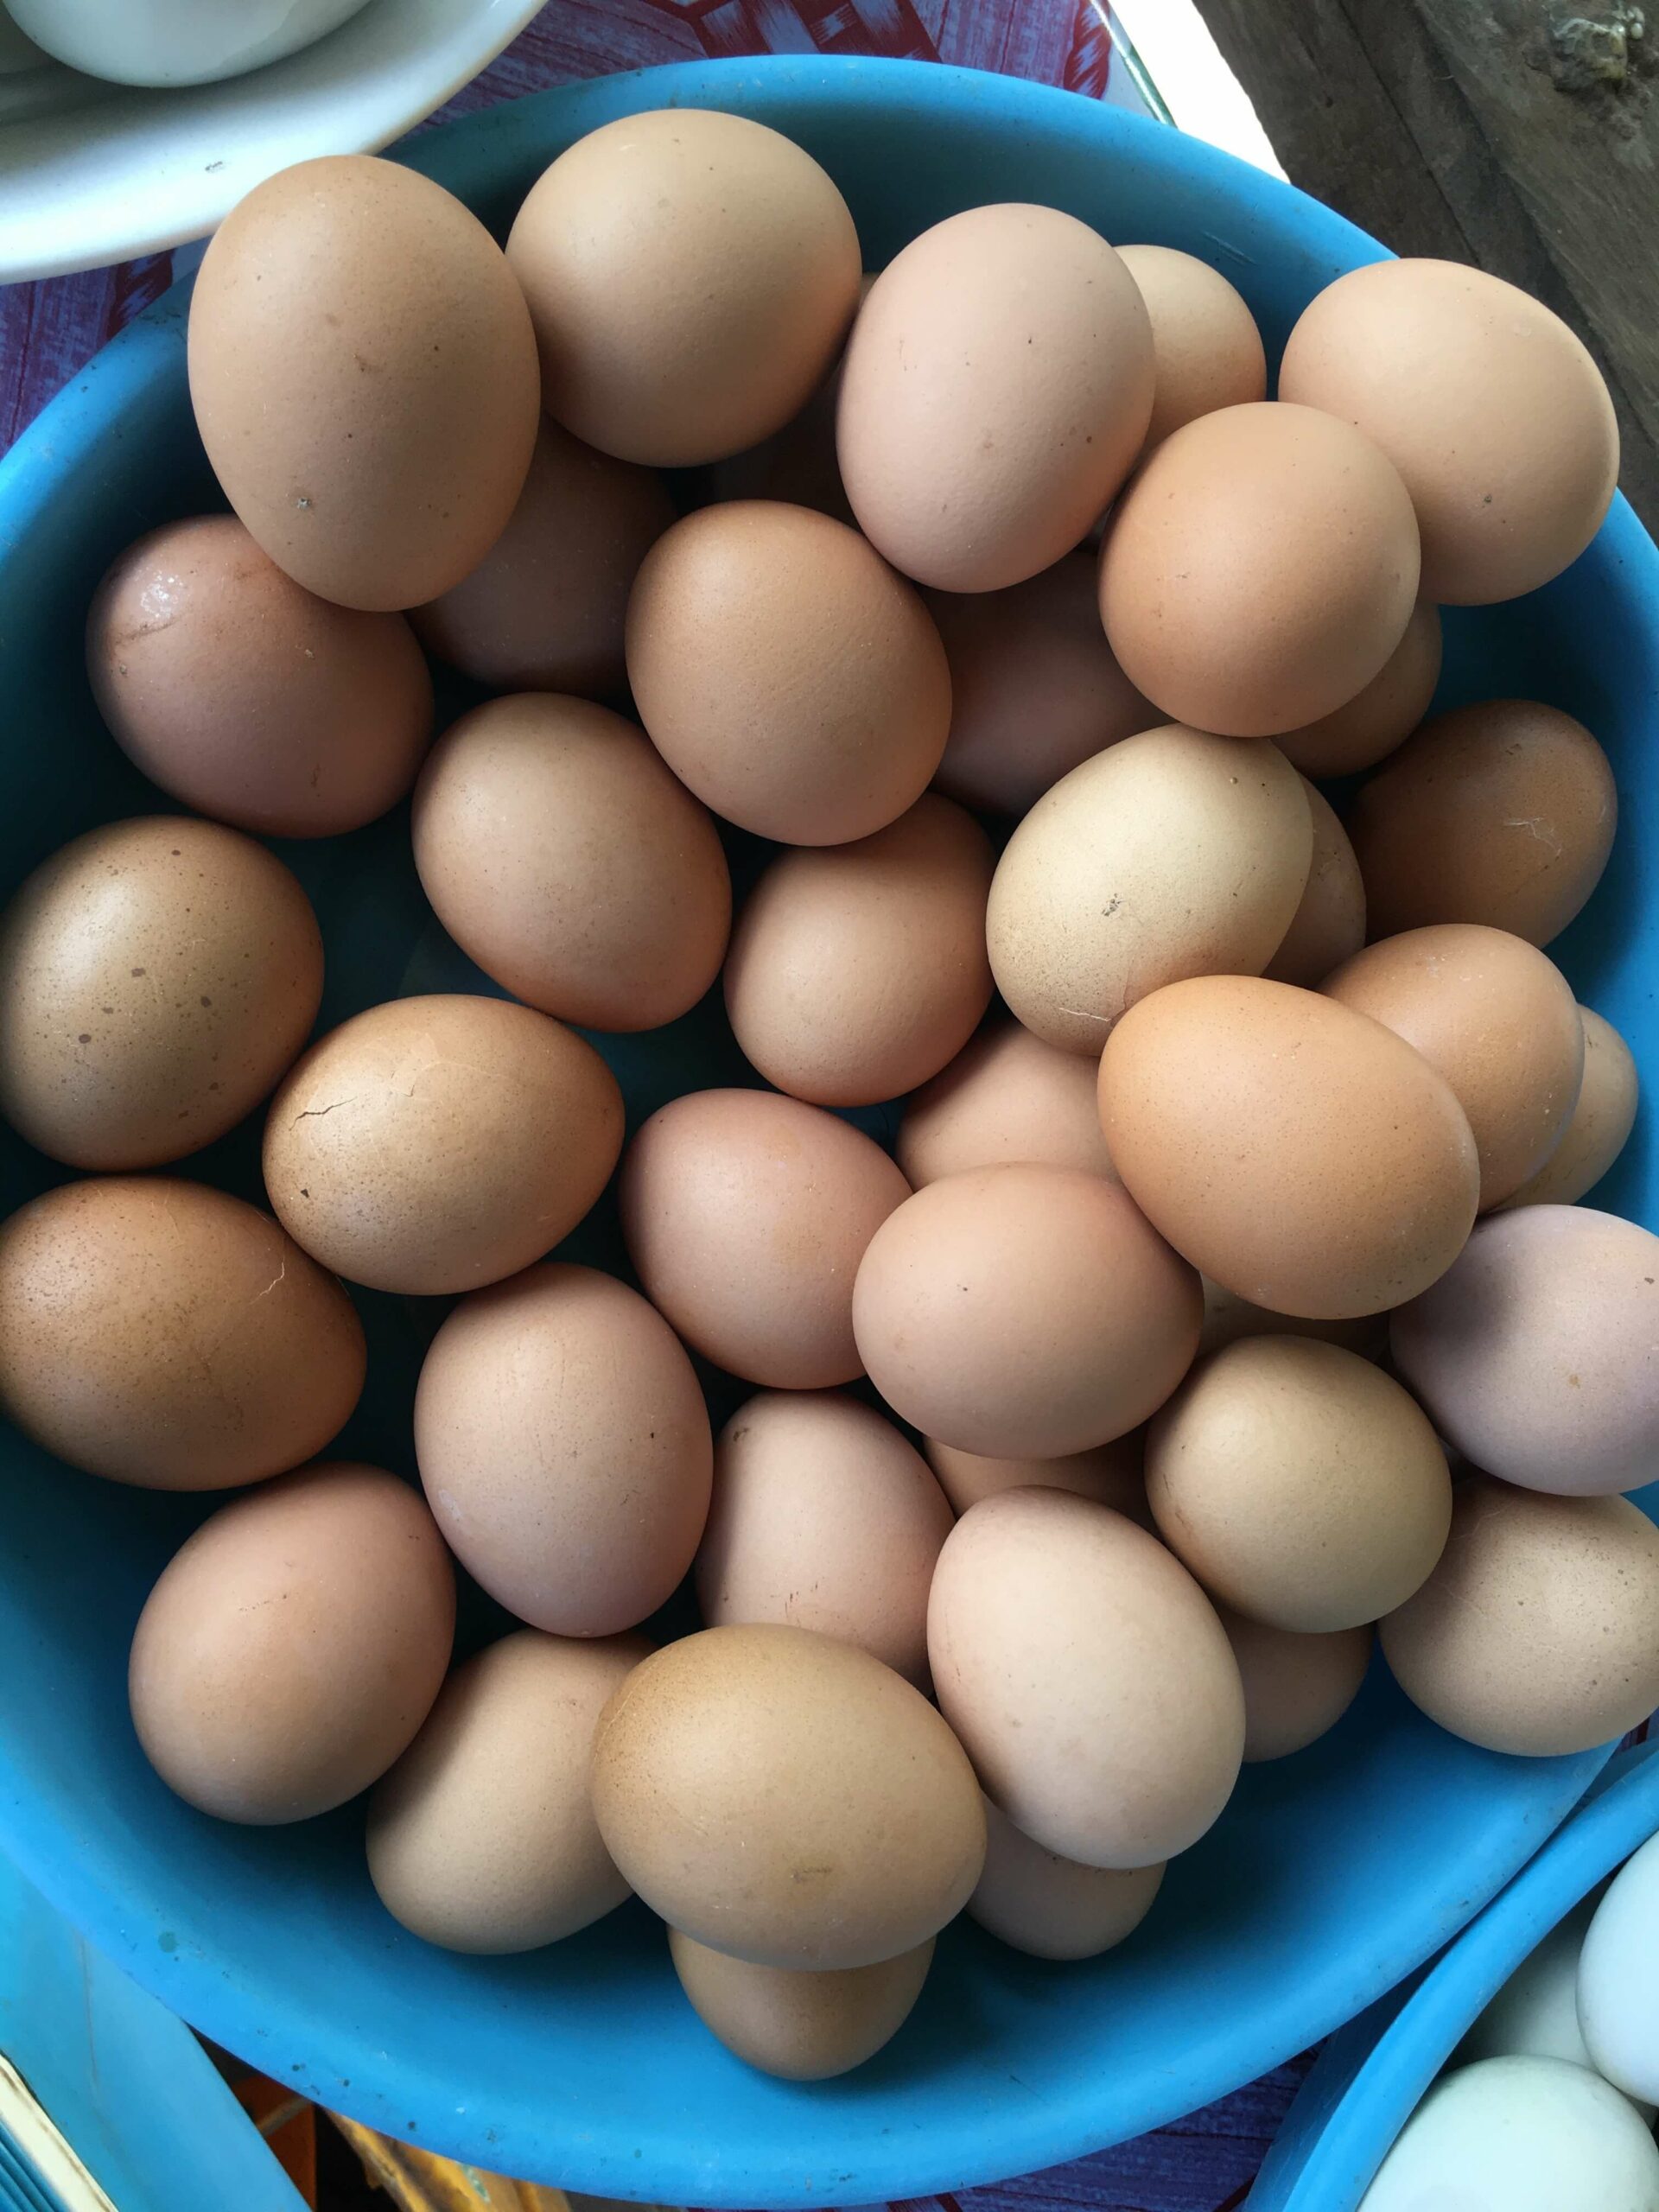 many light brown color eggs in a tray